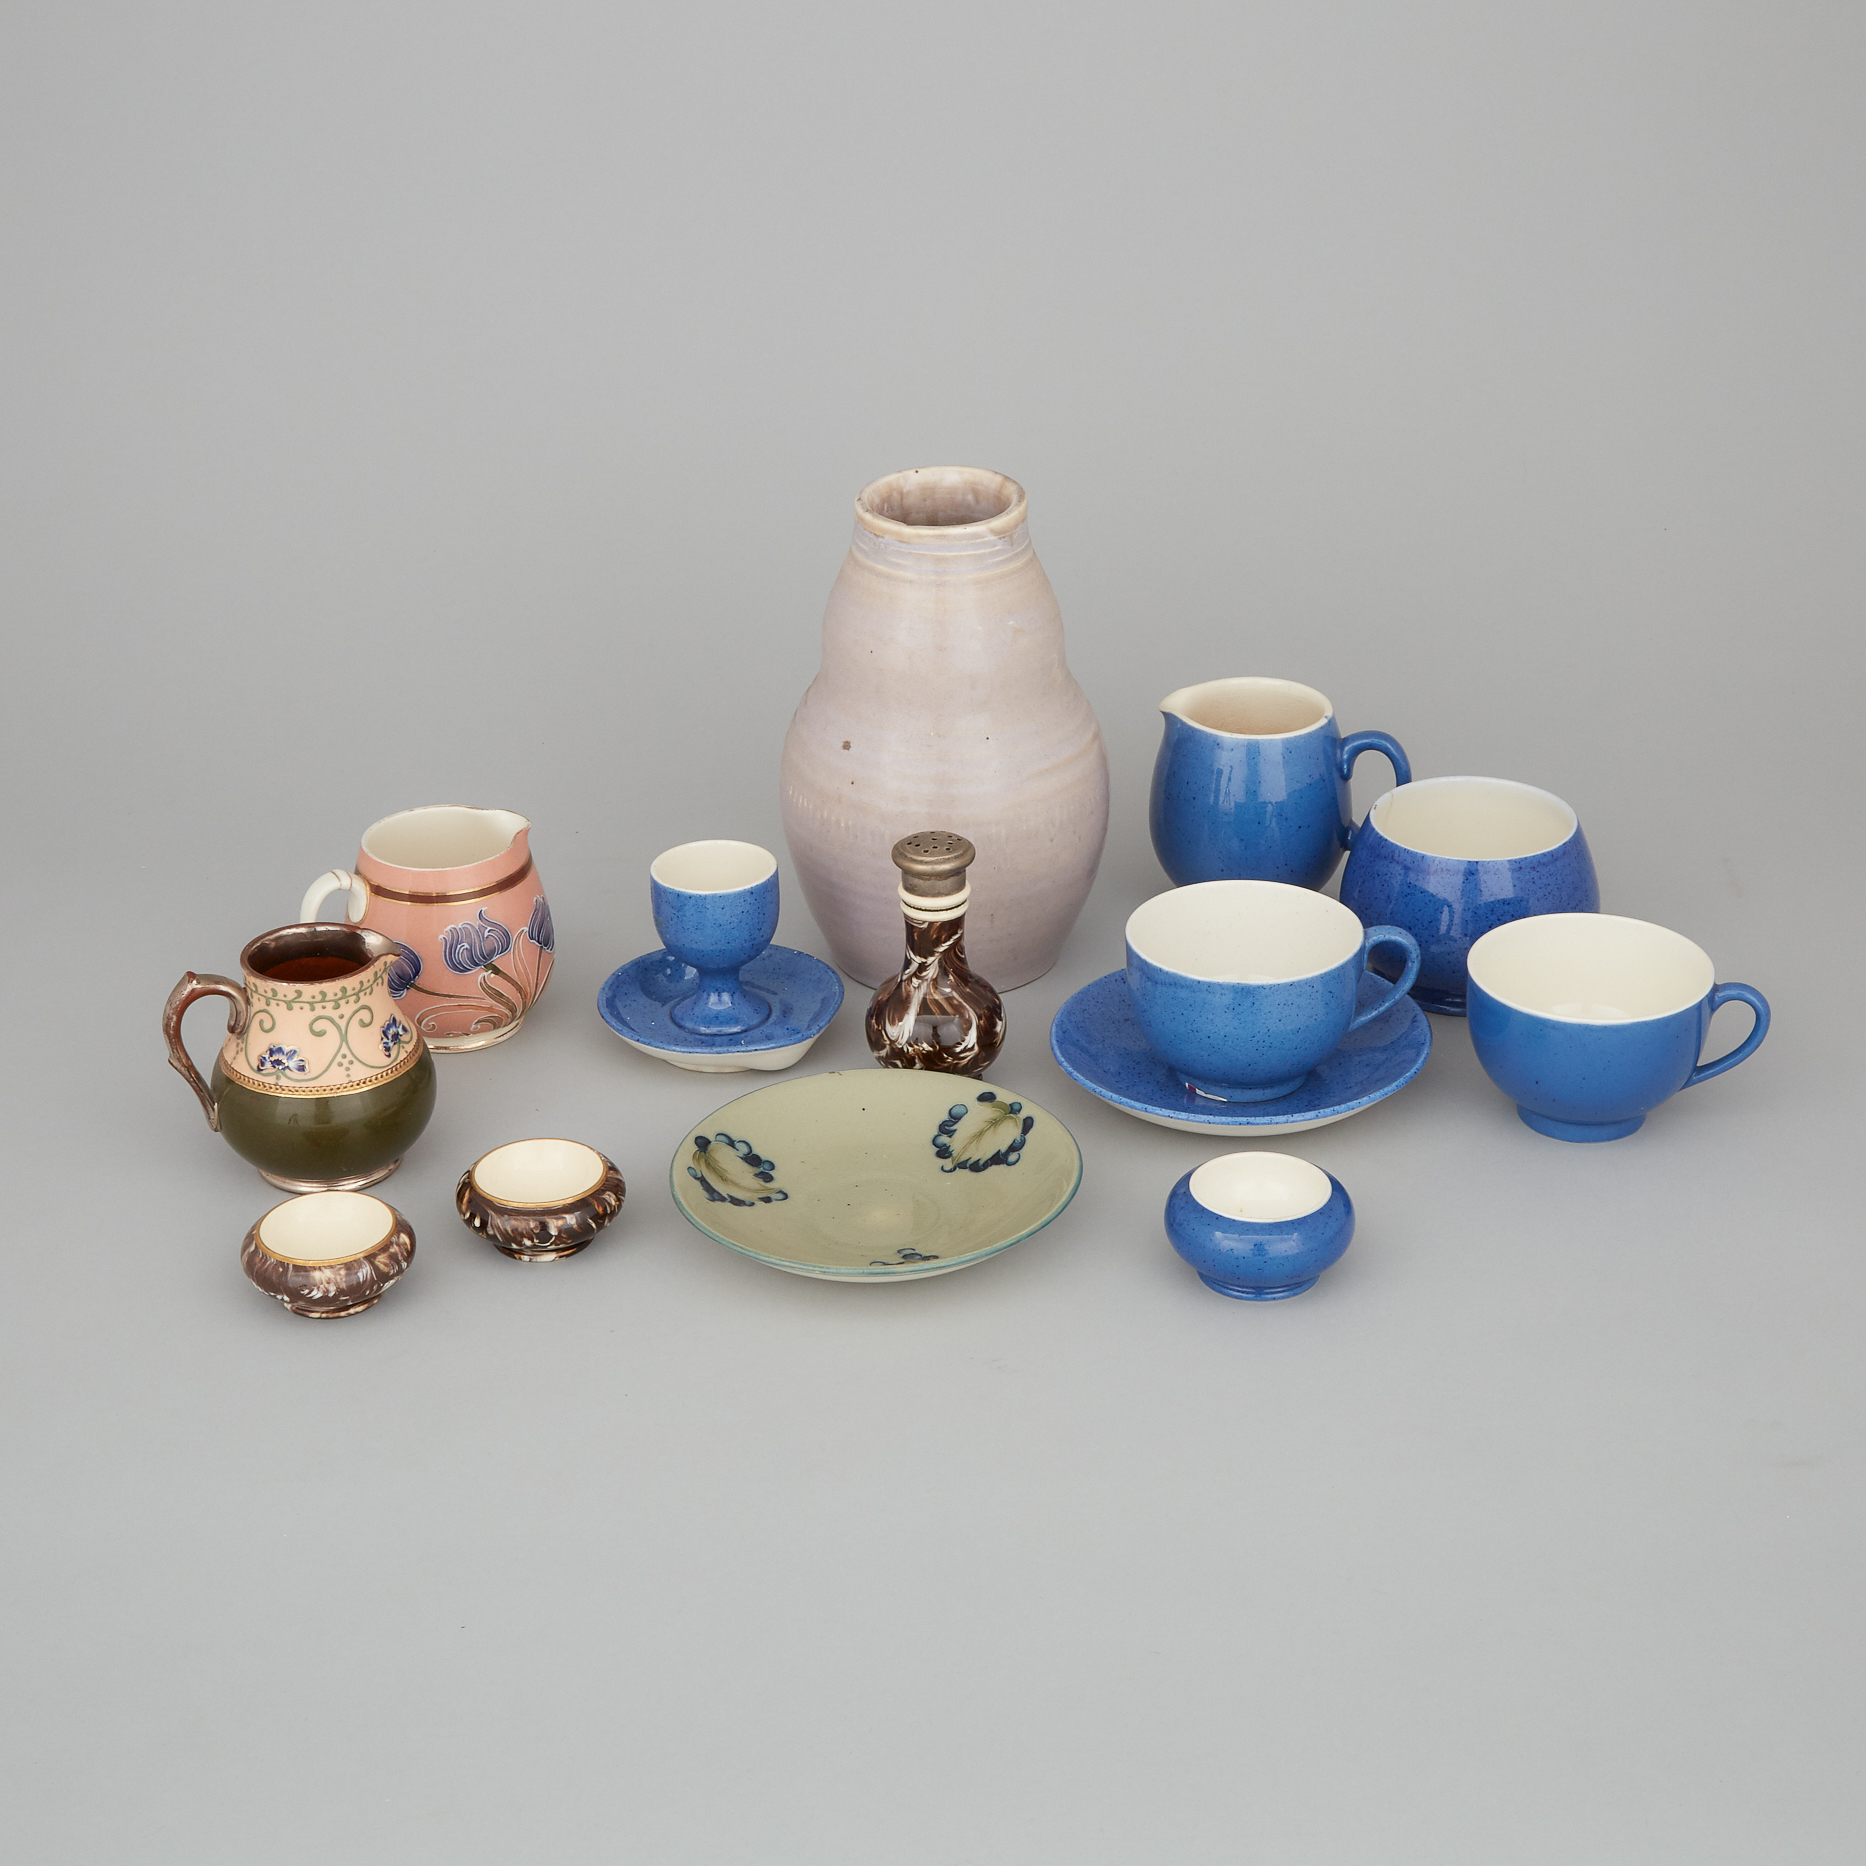 Group of Macintyre and Later Moorcroft Mainly Tablewares, late 19th/ early 20th century